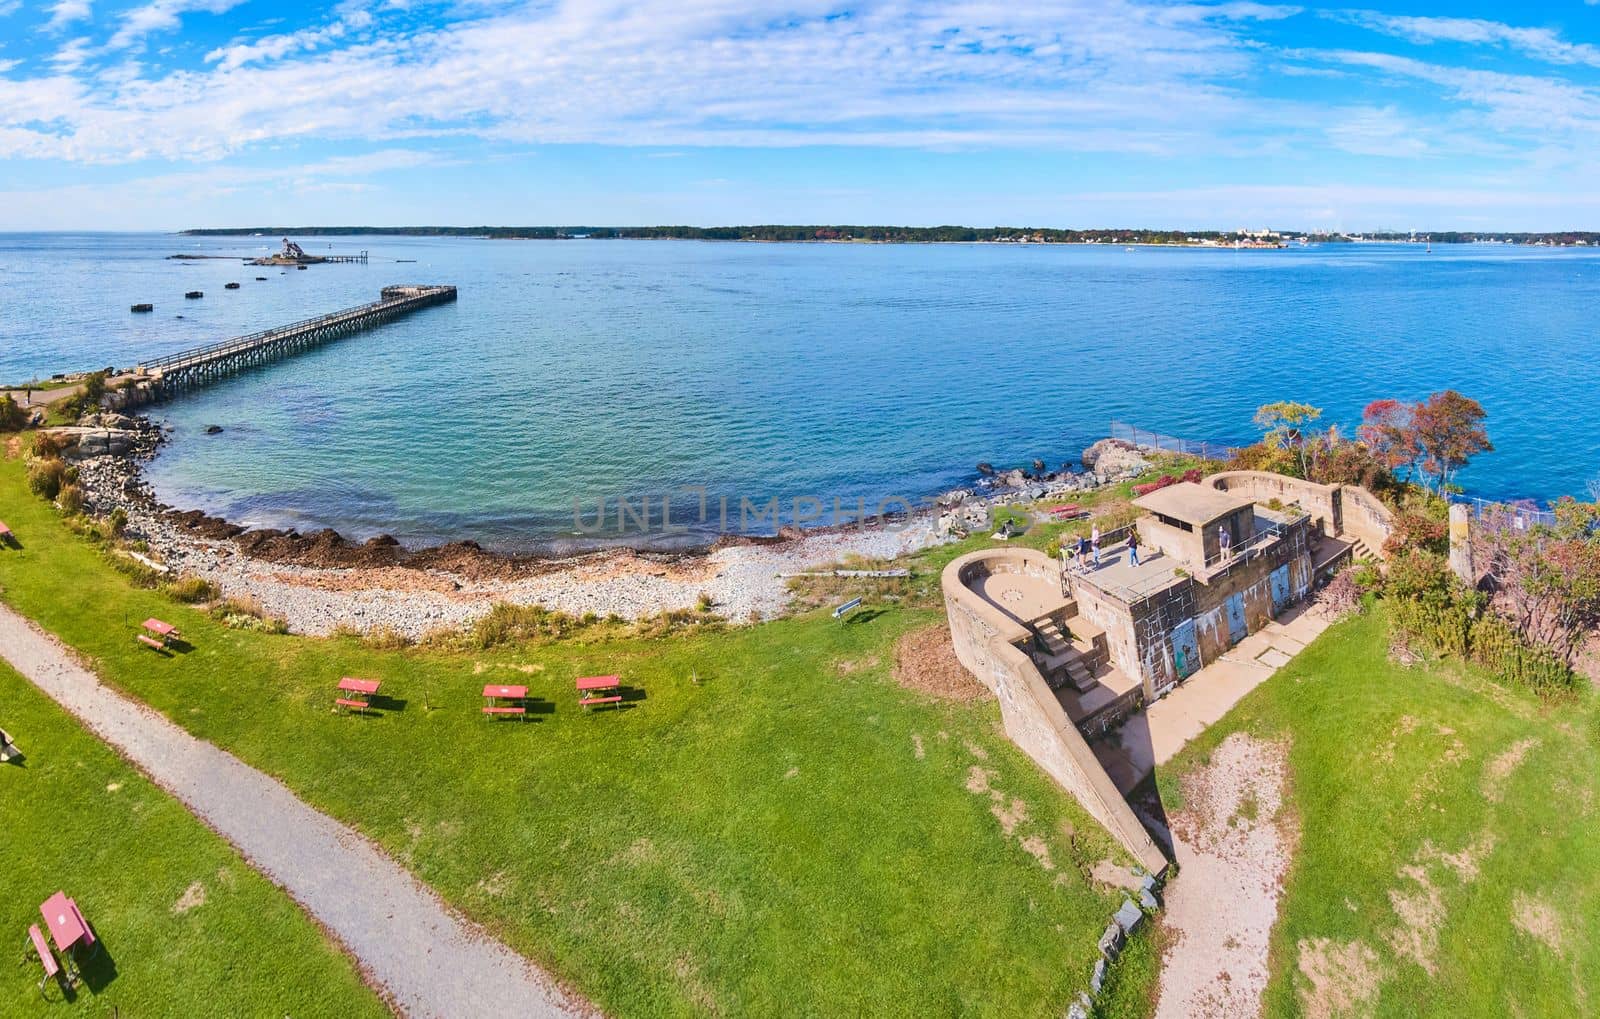 Image of Old military fort on coast of Maine with pier and small island lighthouse in distance